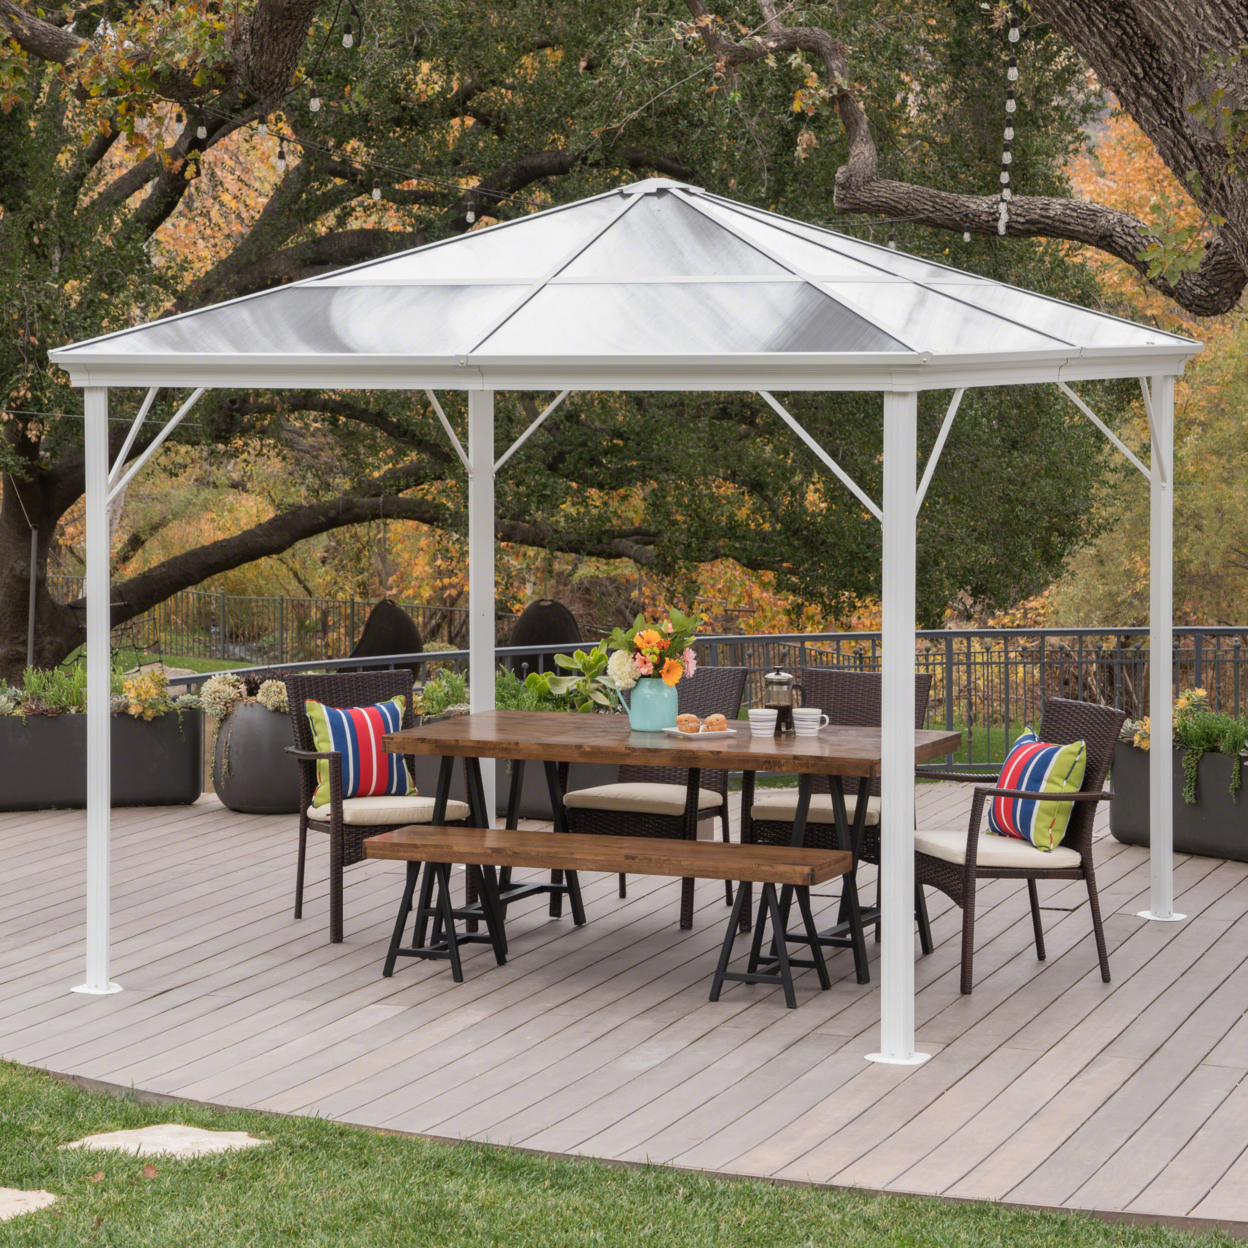 Halley Outdoor 10 X 10 Foot Black Rust Proof Aluminum Framed Hardtop Gazebo (No Curtains) - White